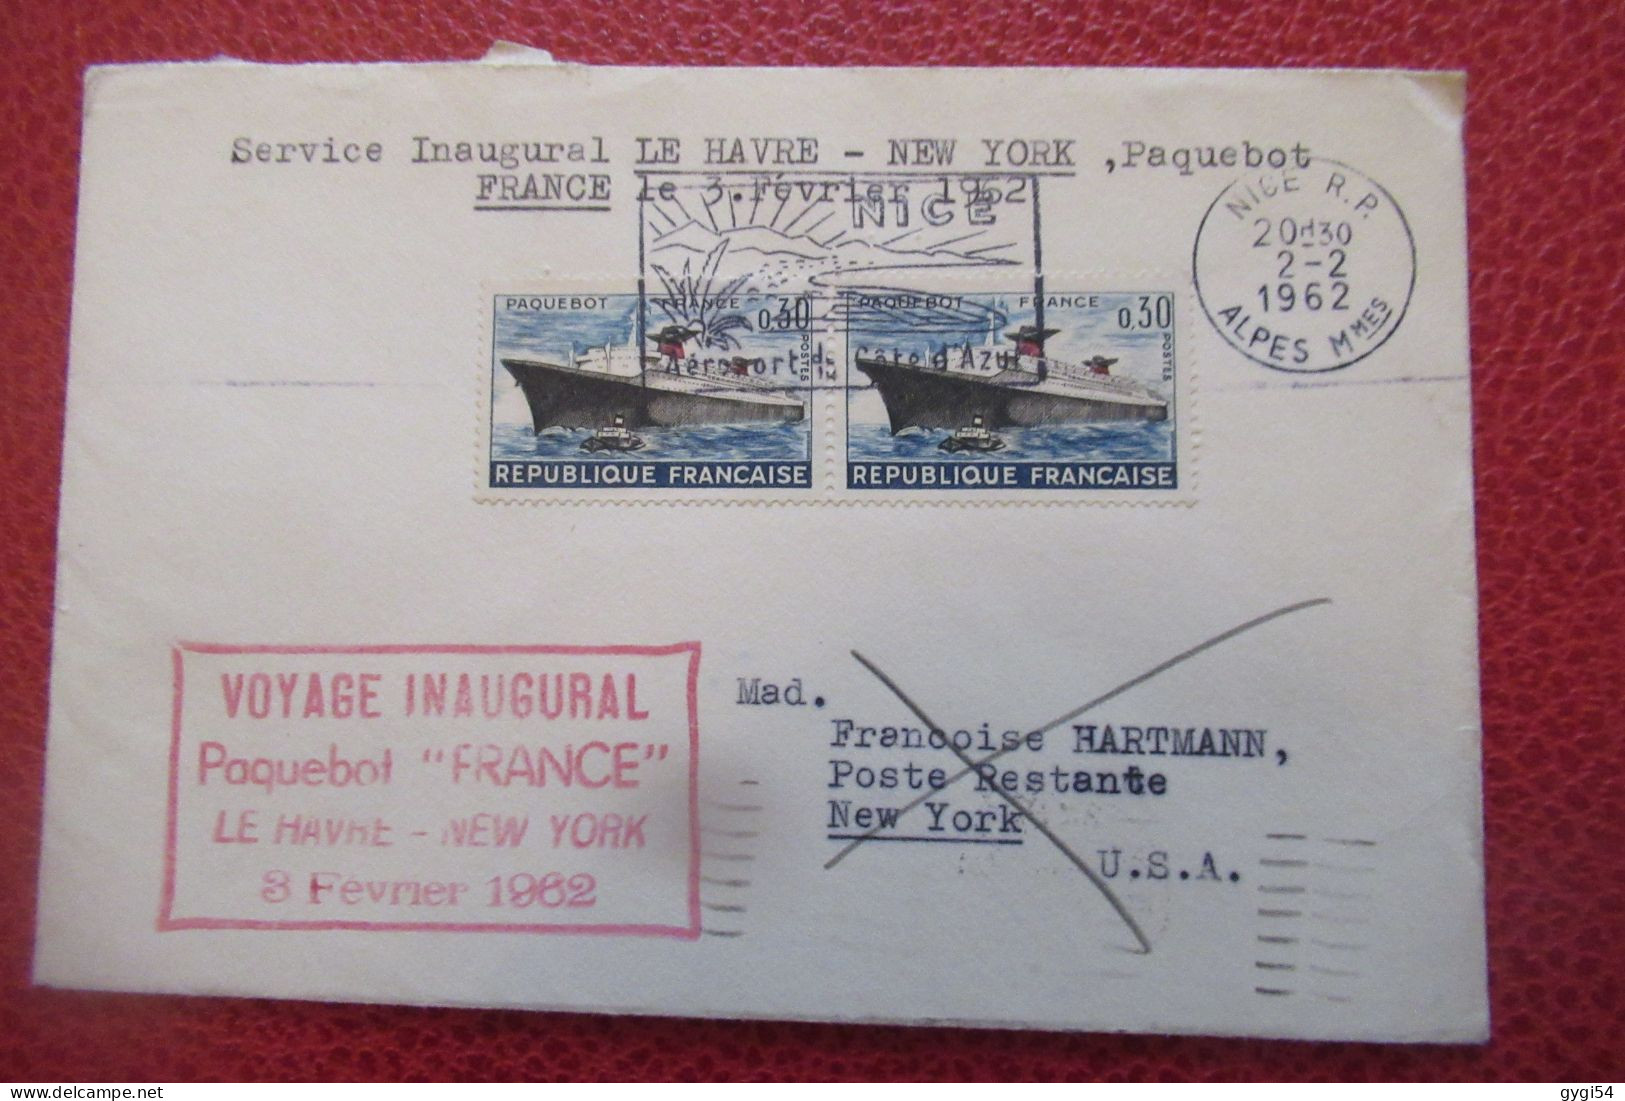 VOYAGE  INAUGURAL  Paquebot FRANCE  LE HAVRE - NEW - YORK  08 02 1962 - Storia Postale